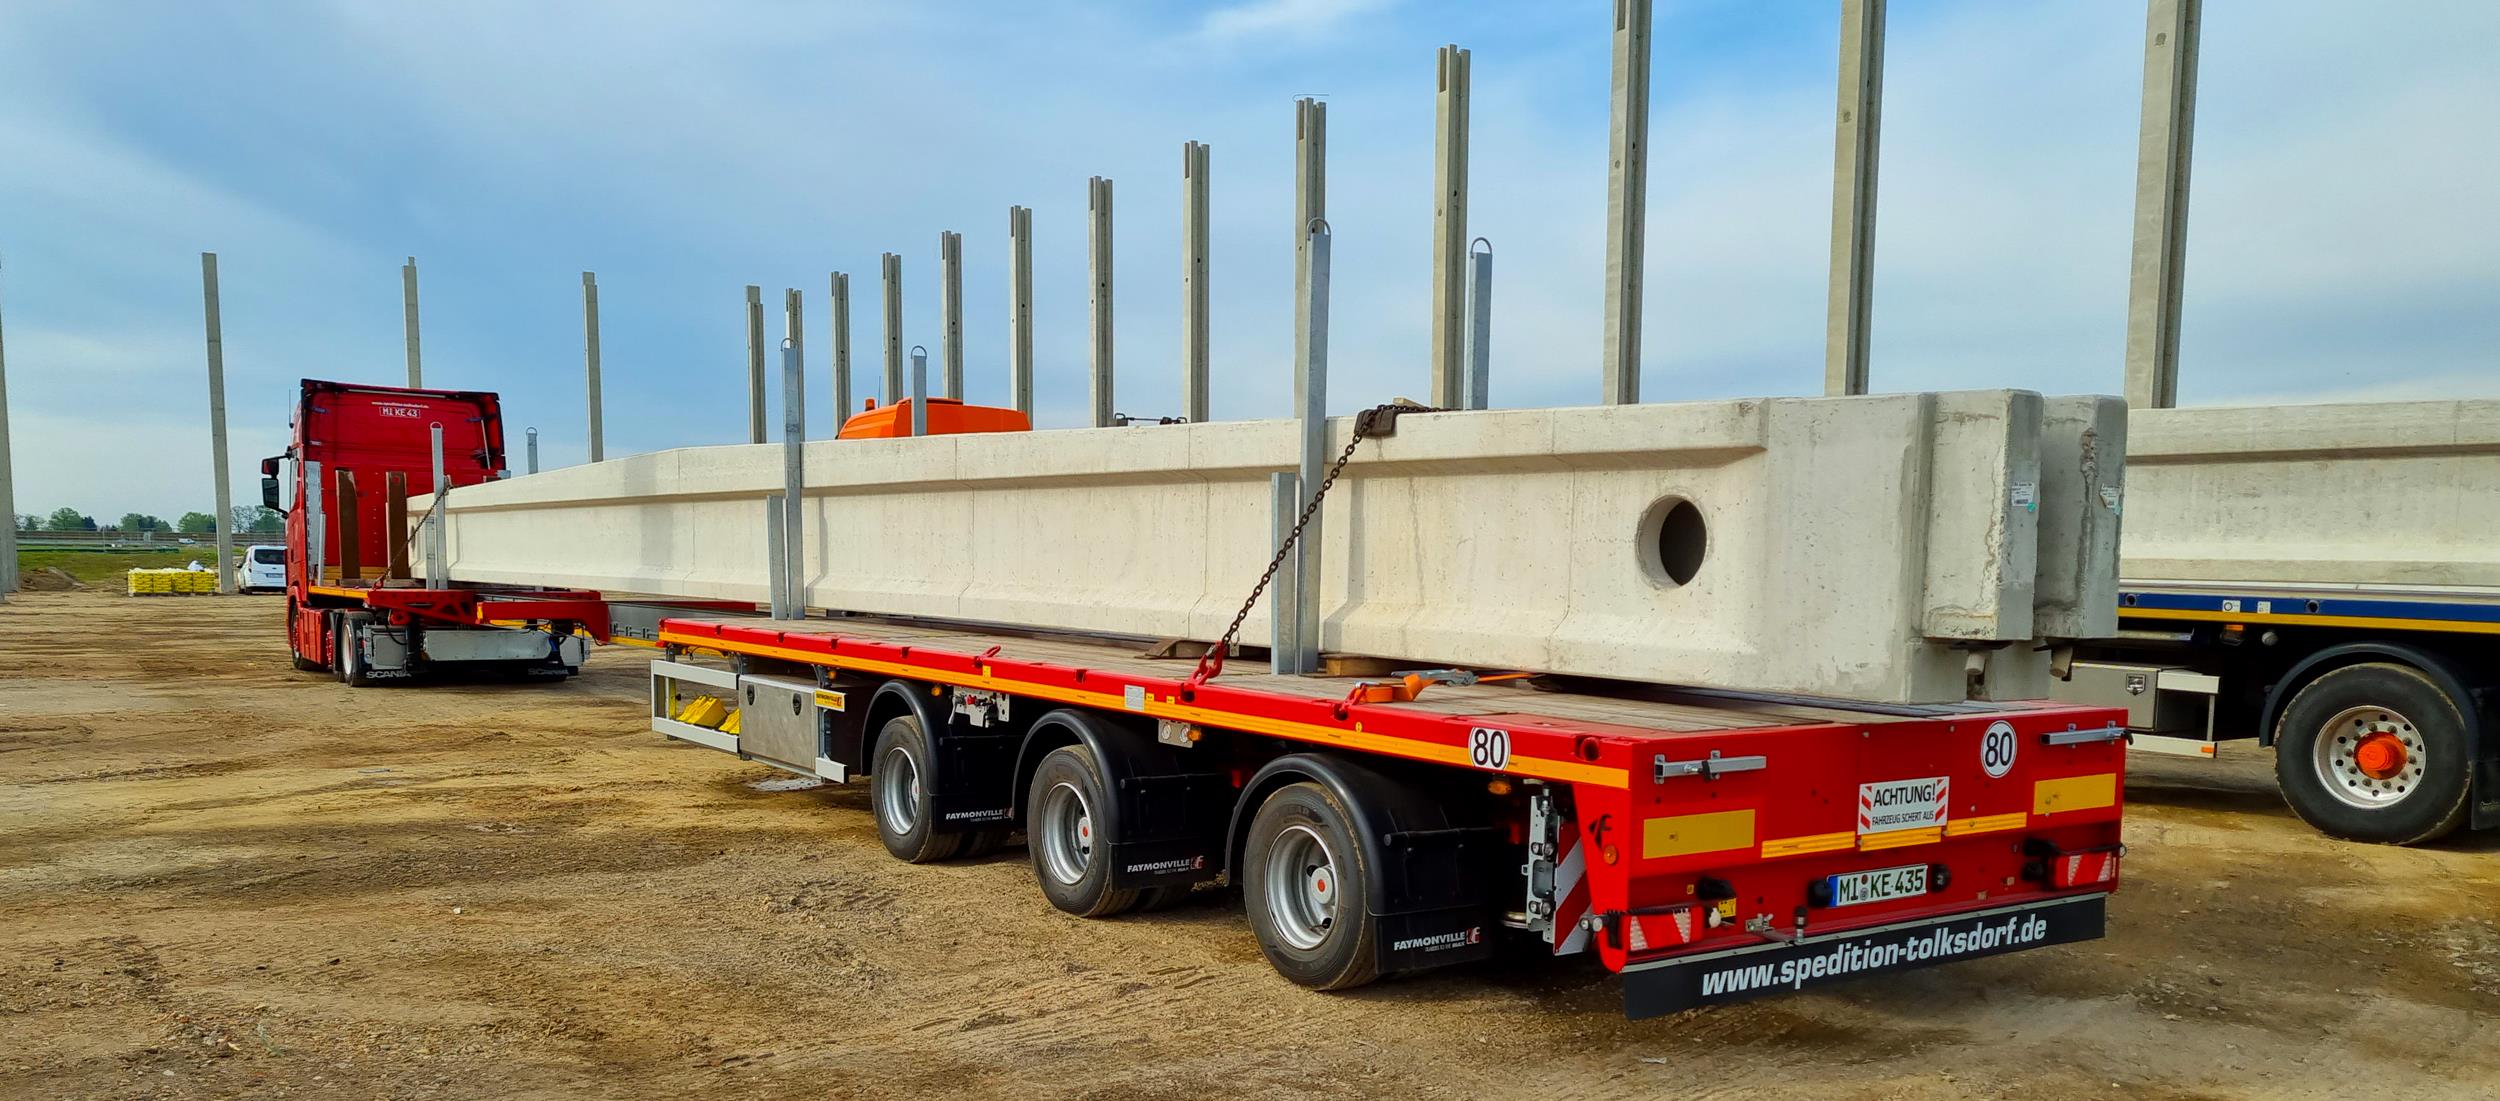 Are You in Need of Stretch Trailer Shipping Services?